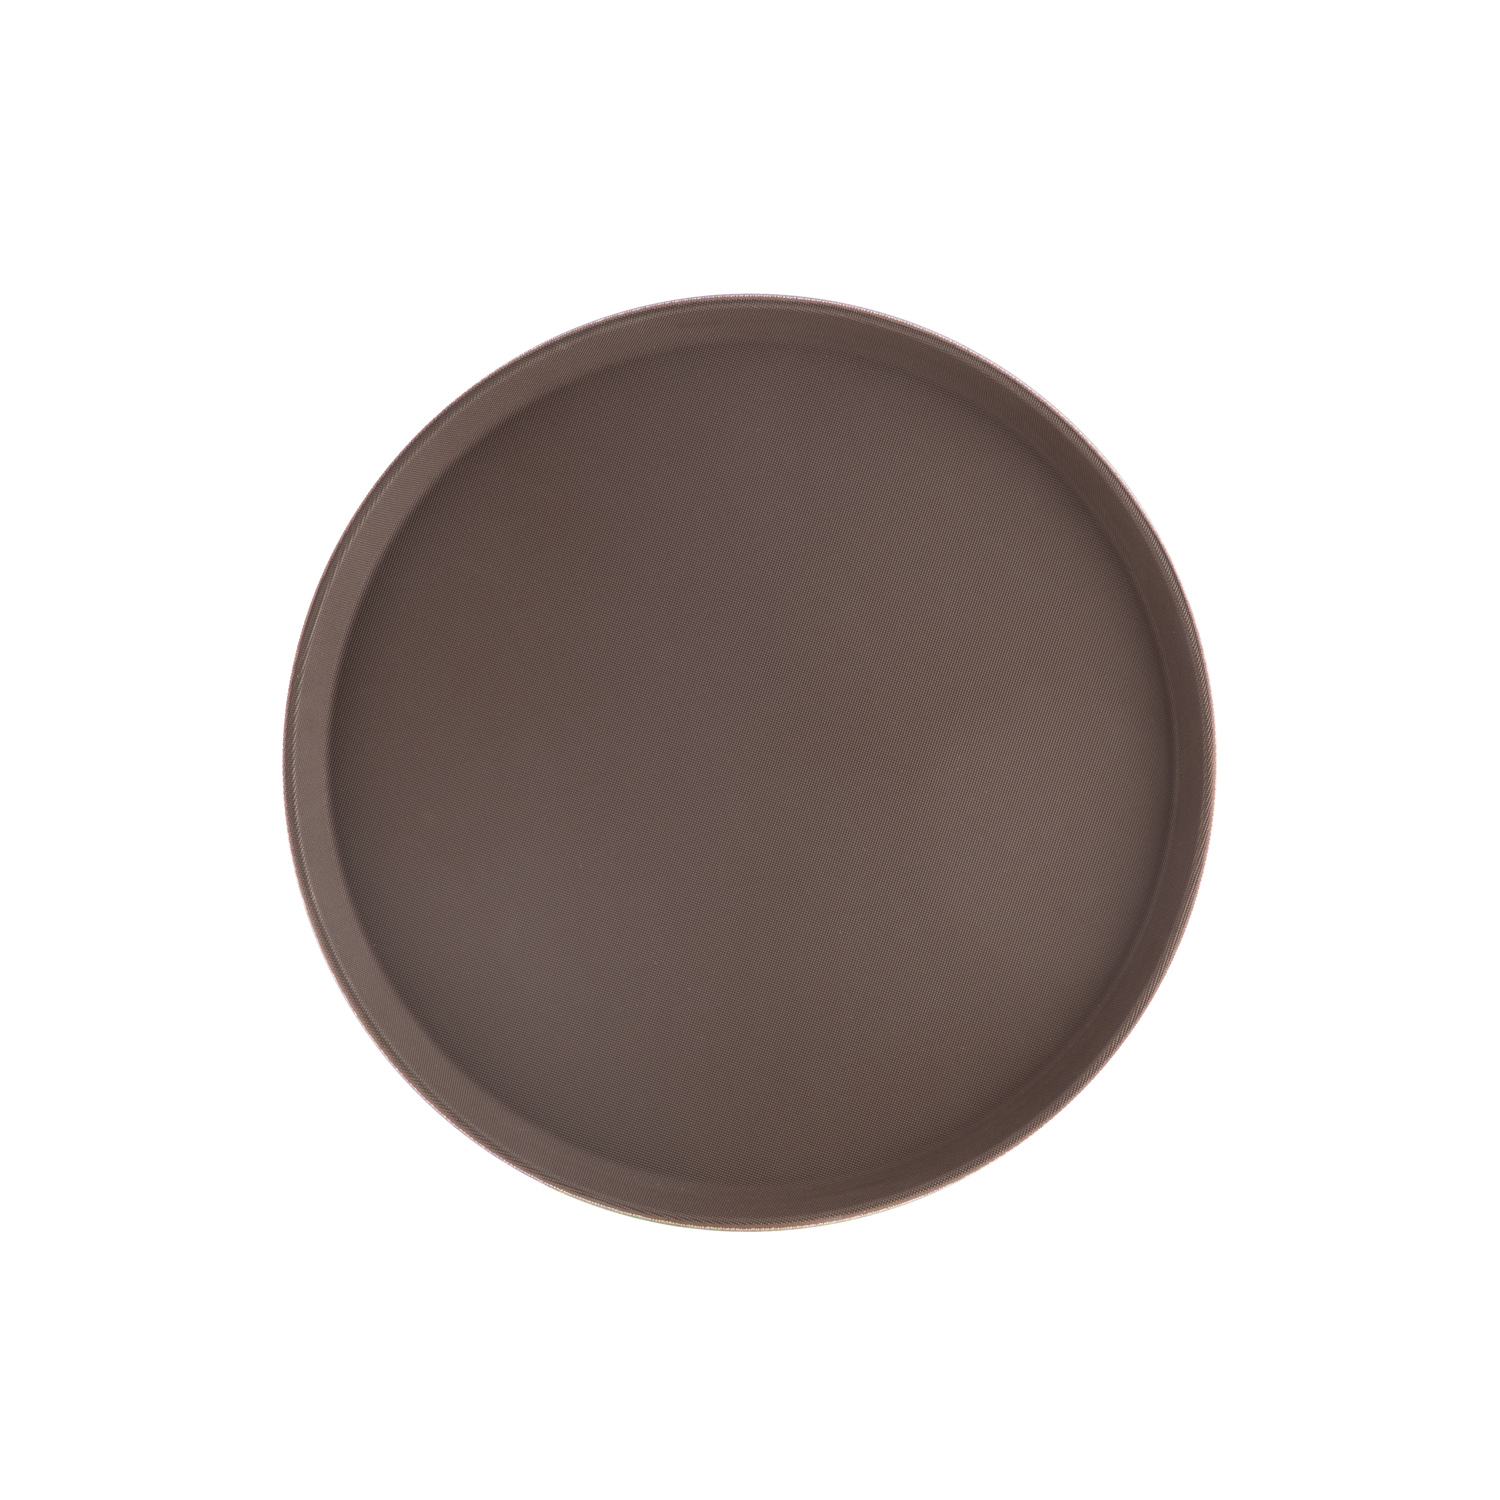 CAC China PDTR-16BN Brown Round Plastic Super Tray 16"Dia